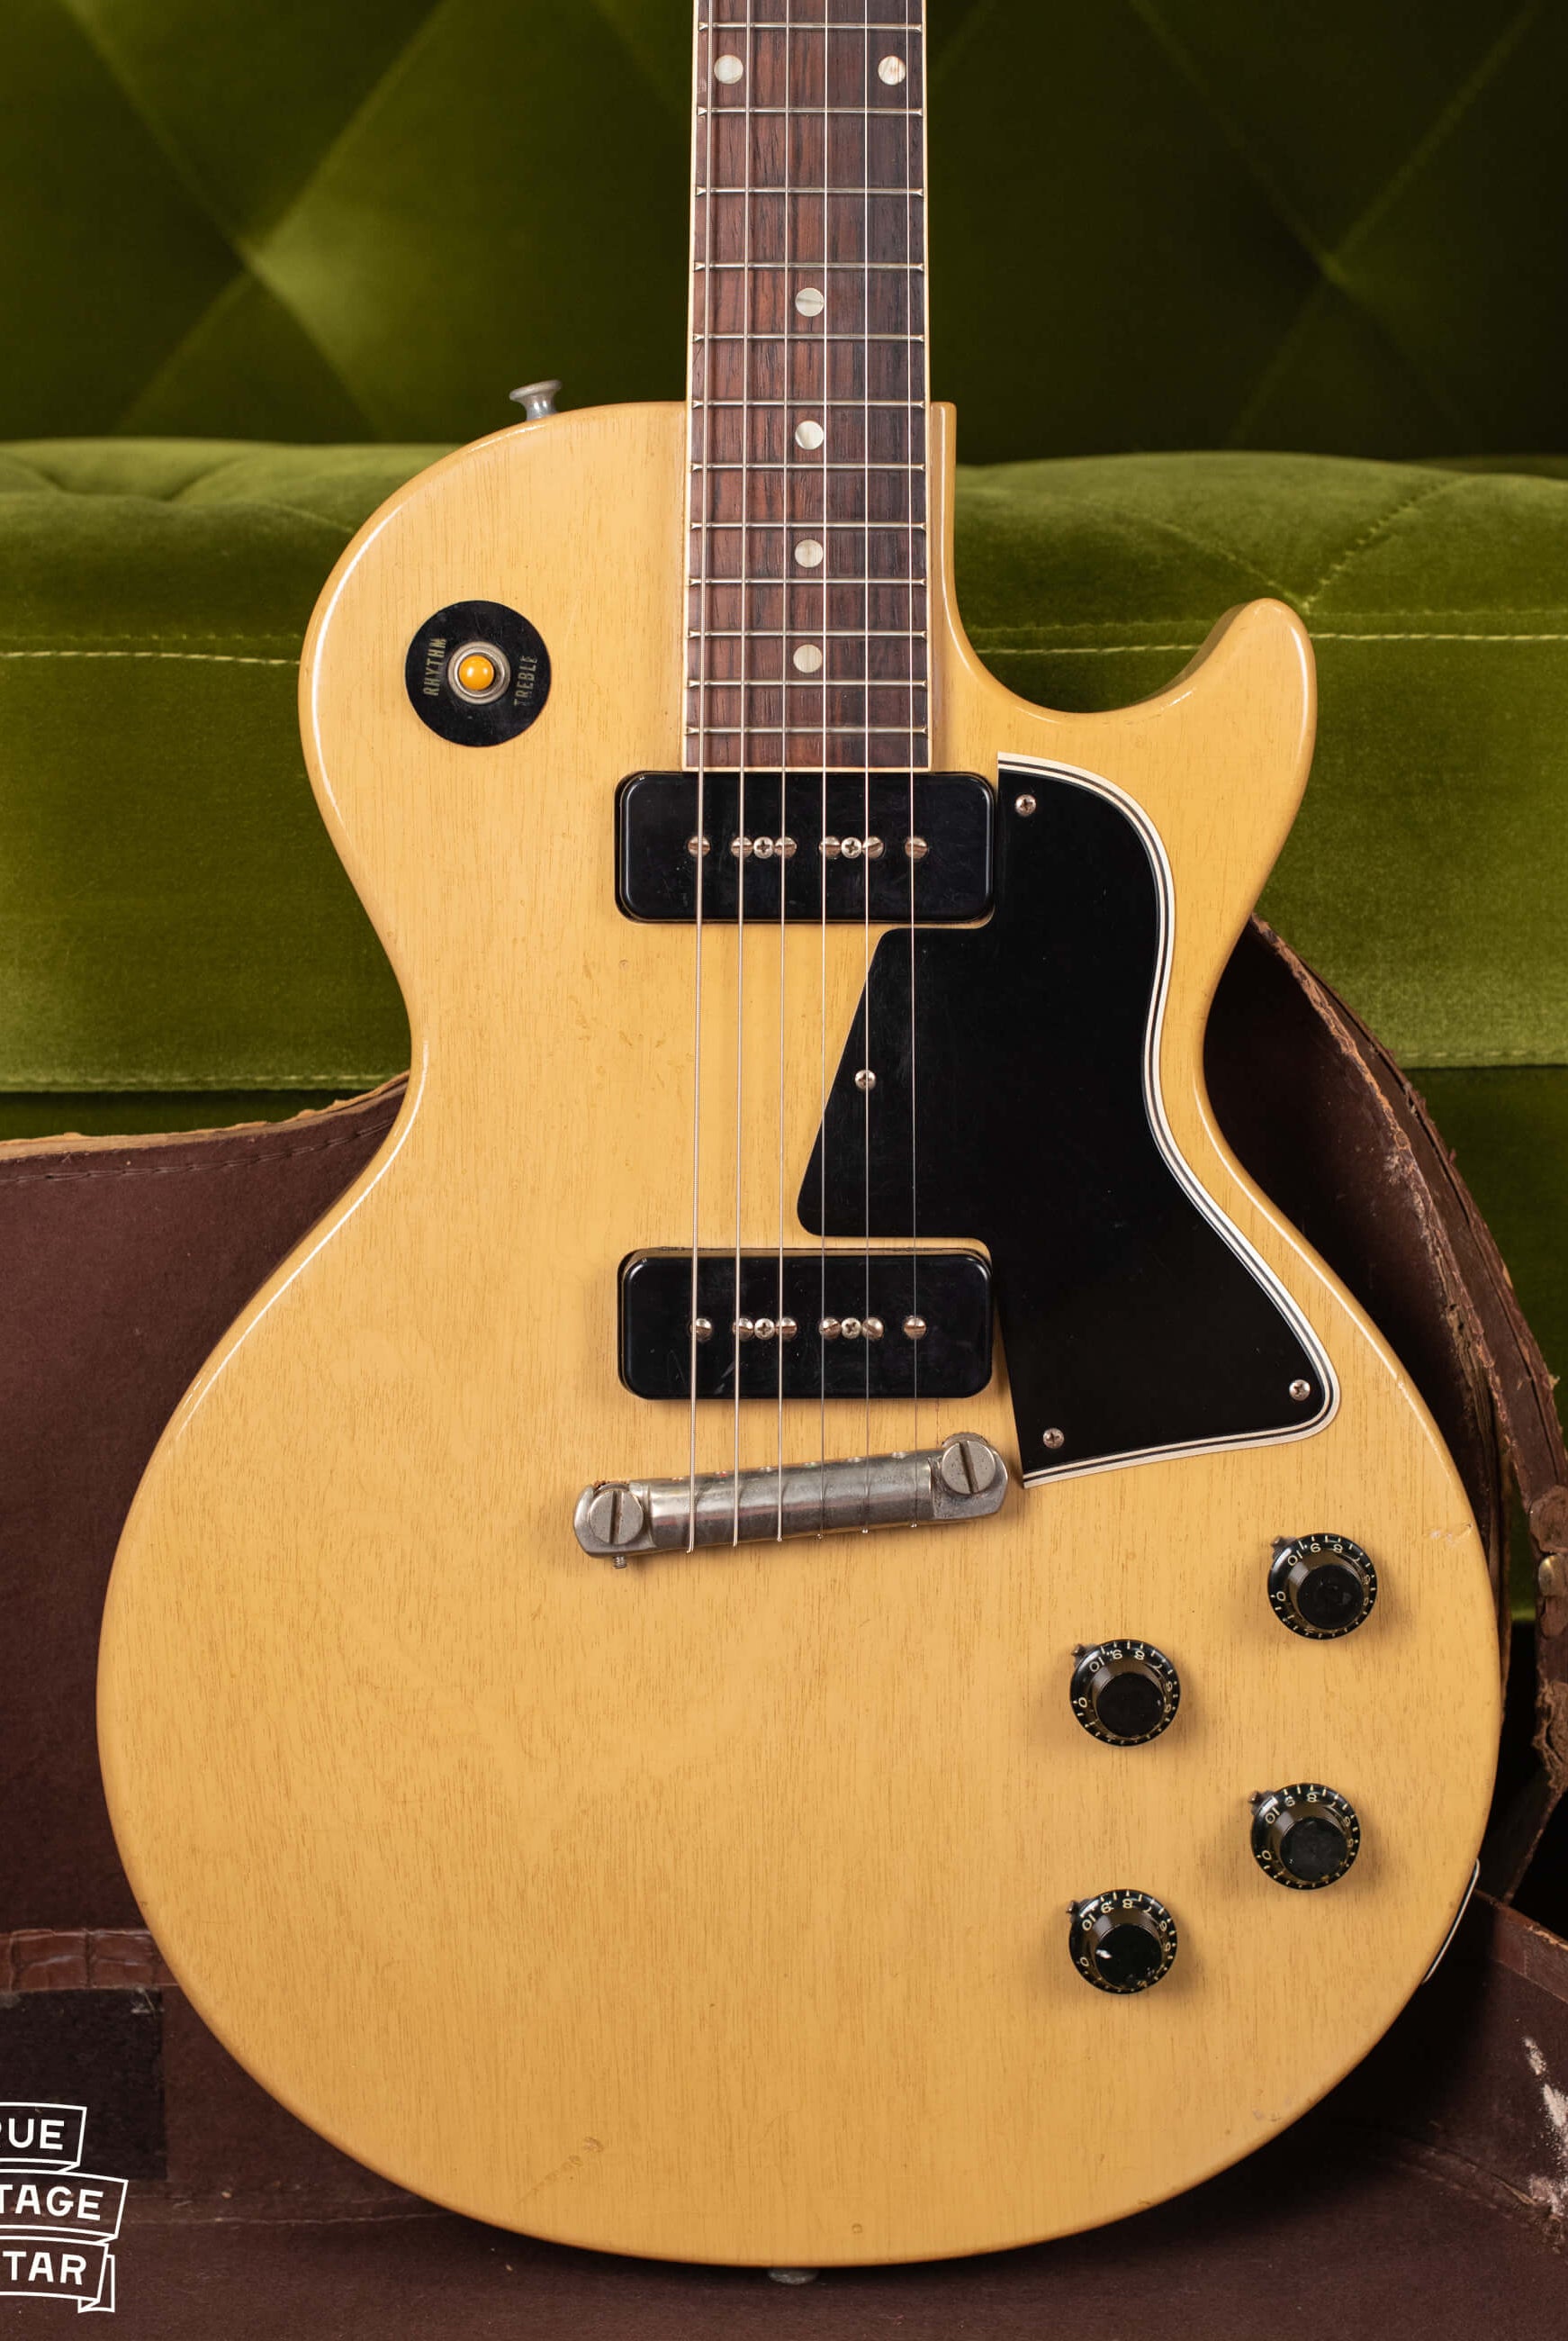 Gibson Les Paul 1956 guitar, yellow, vintage original Les Paul Special guitar with black pickguard and knobs. 